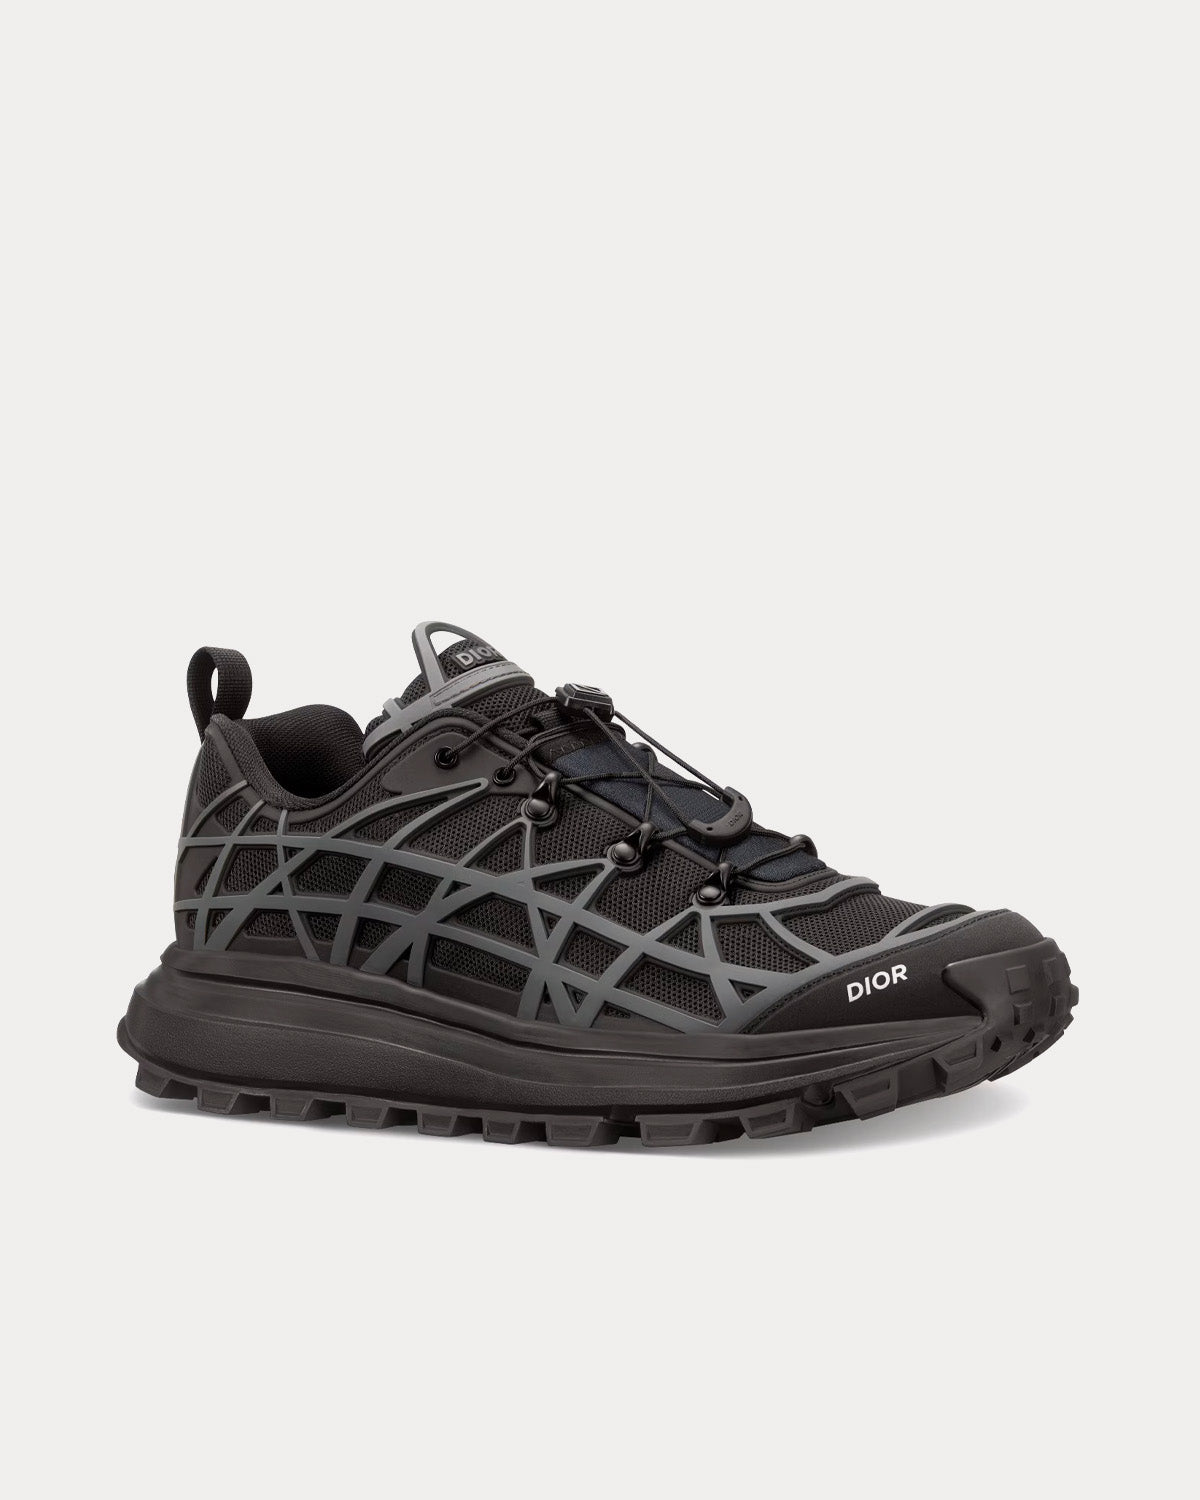 Dior B31 Runner Technical Mesh & Rubber with Warped Cannage Motif Black